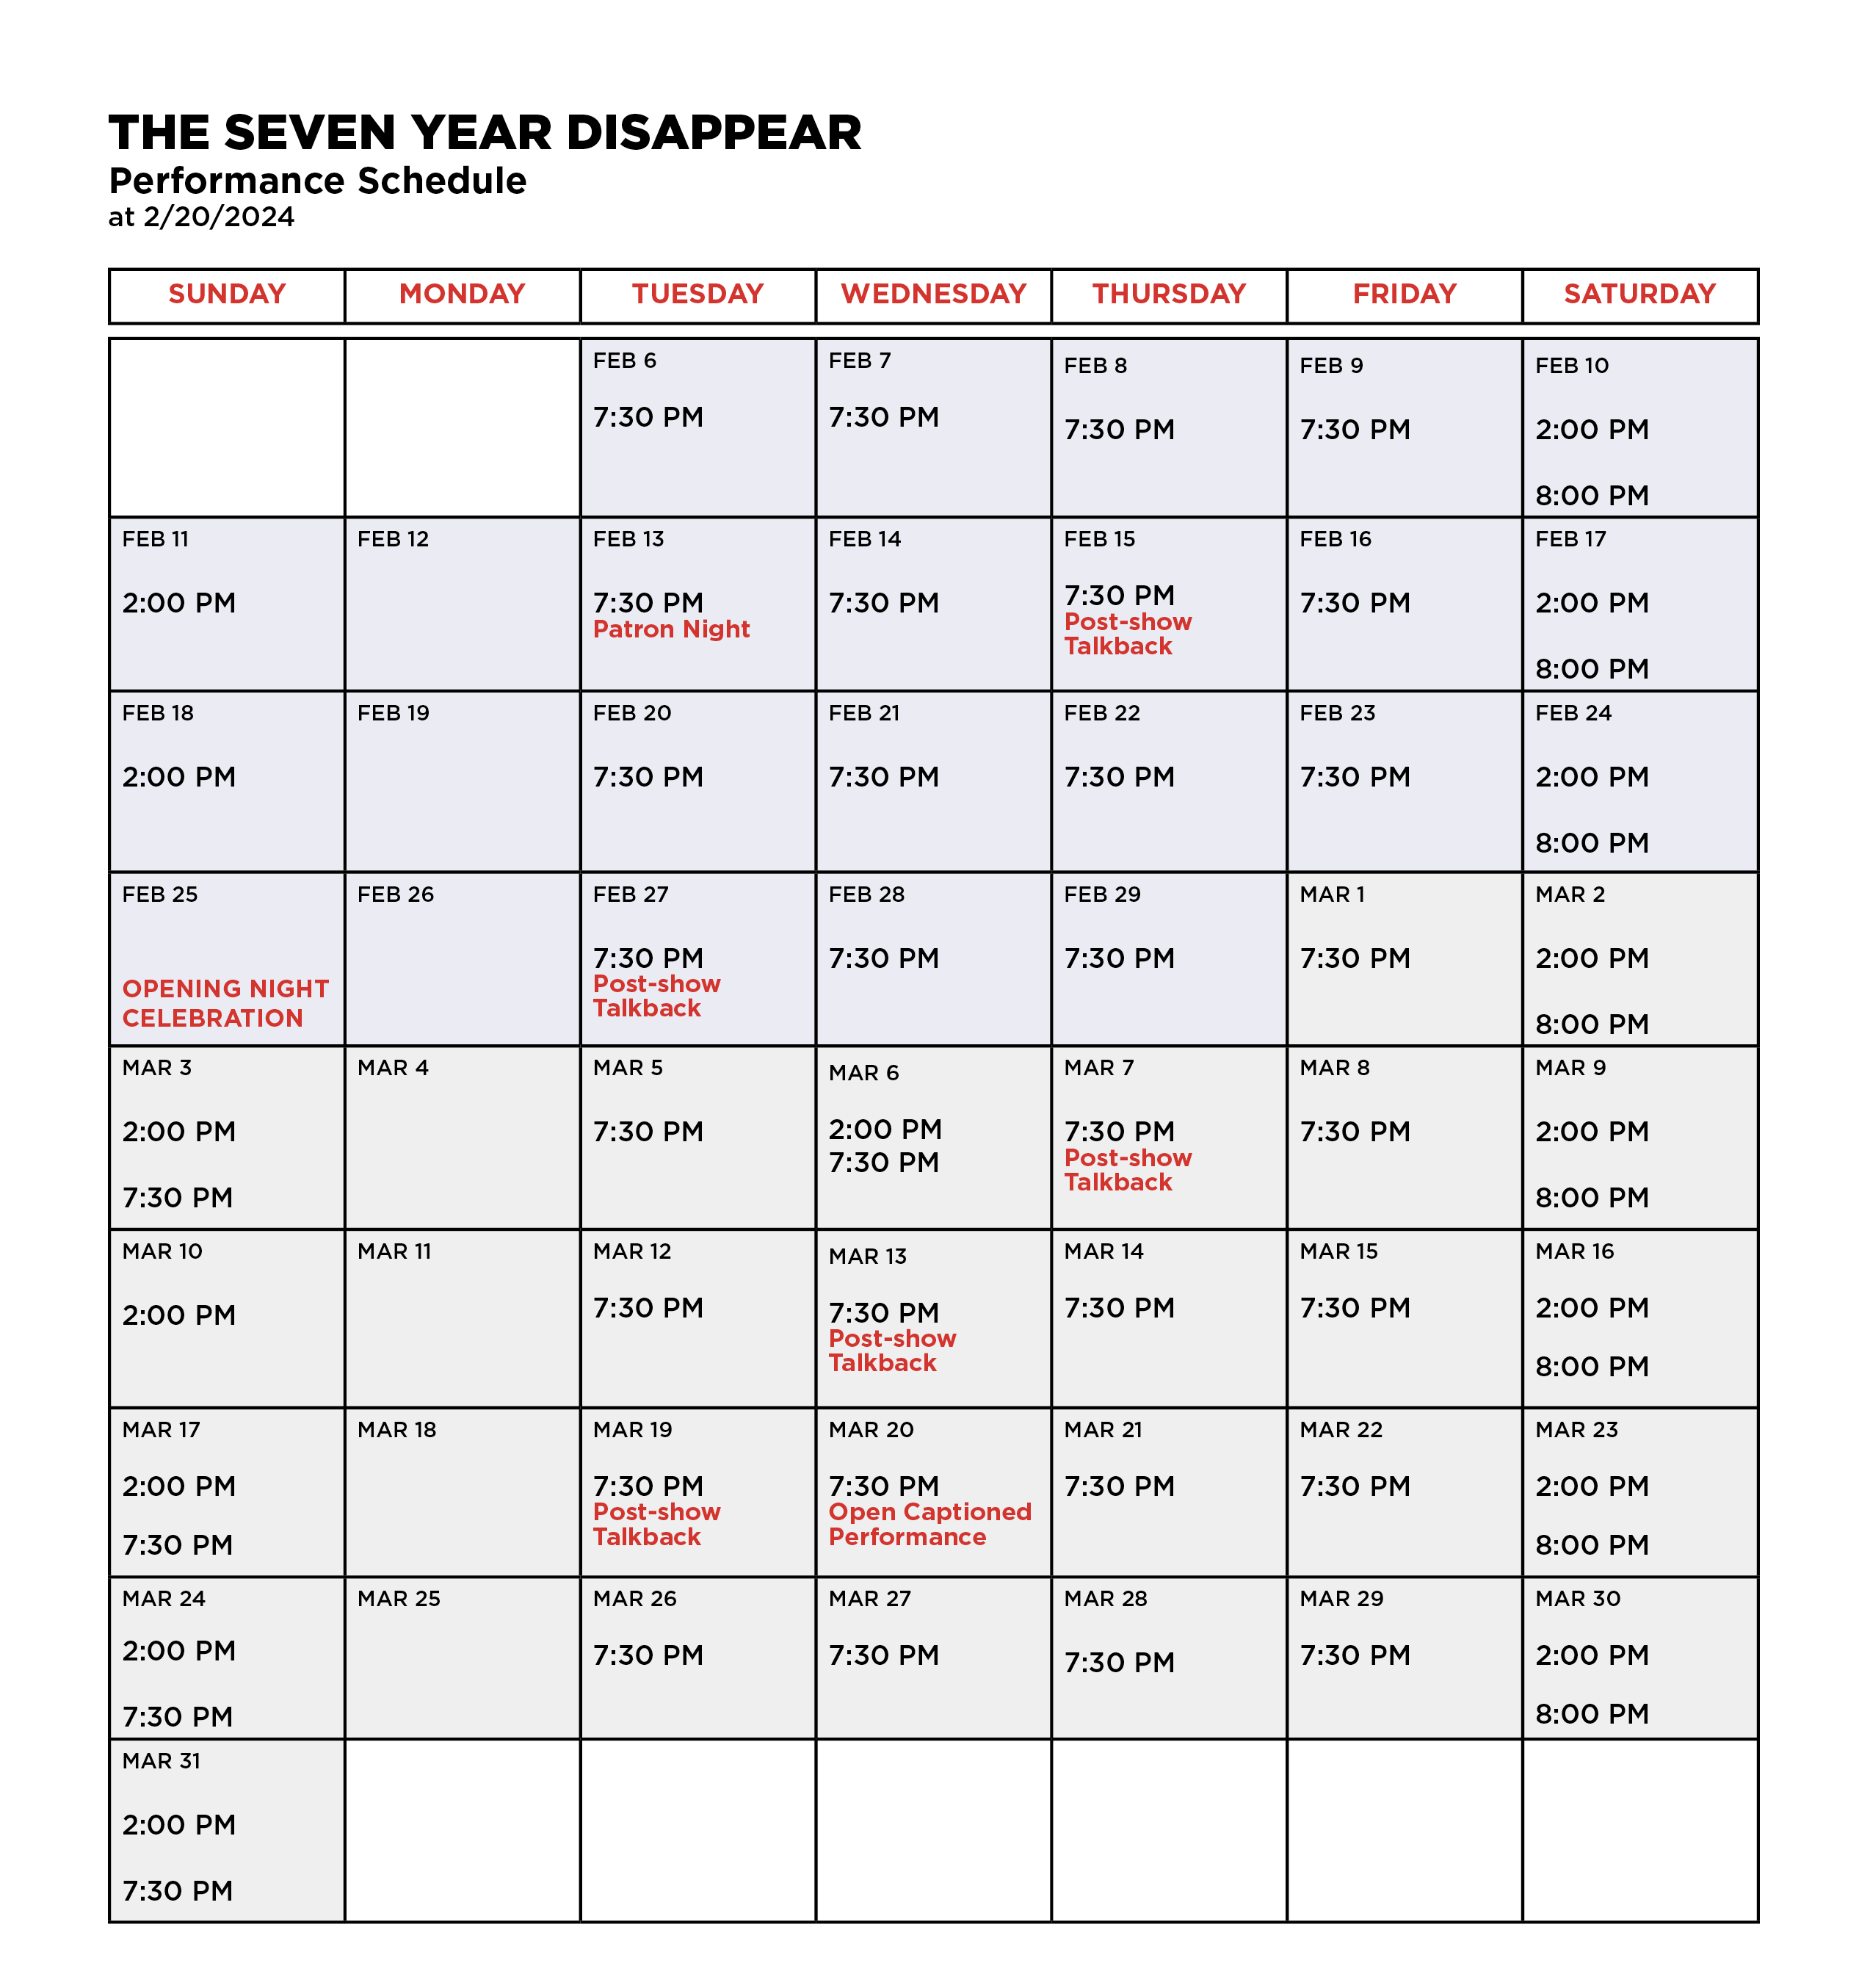 The Seven Year Disappear Performance Calendar at 2.21.24